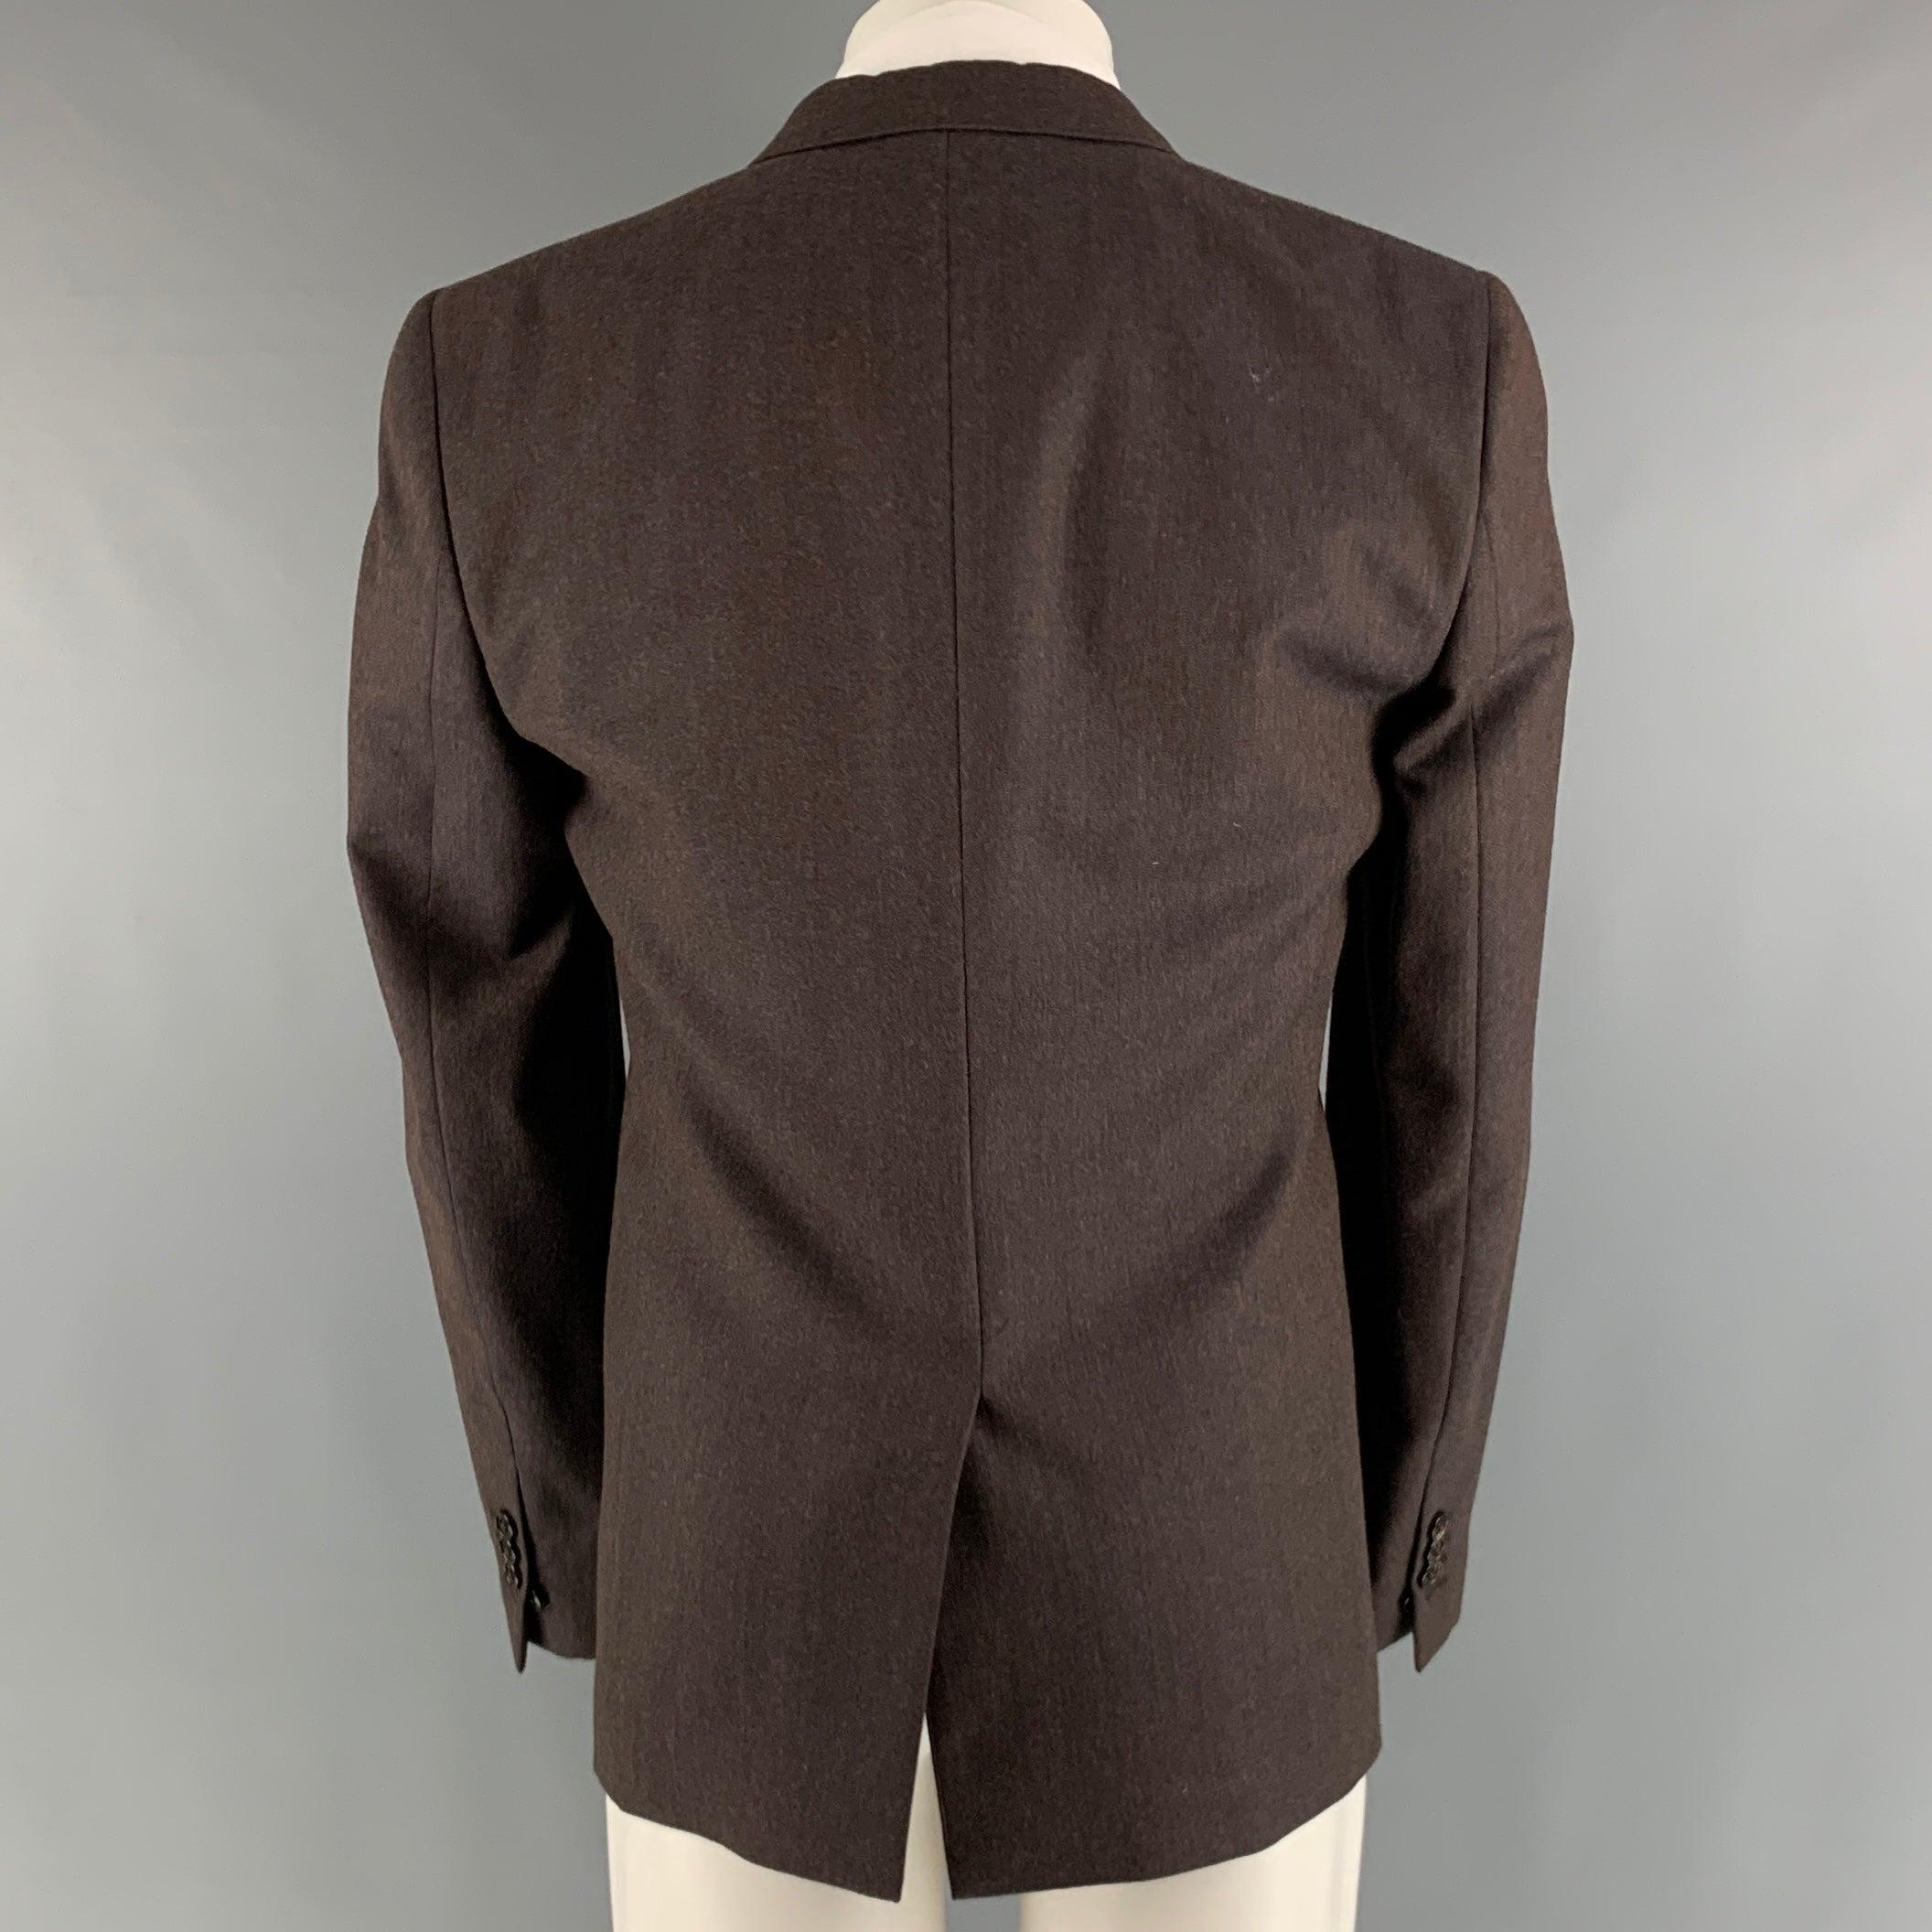 MARC JACOBS Size 38 Brown Solid Wool Notch Lapel Sport Coat In Good Condition For Sale In San Francisco, CA